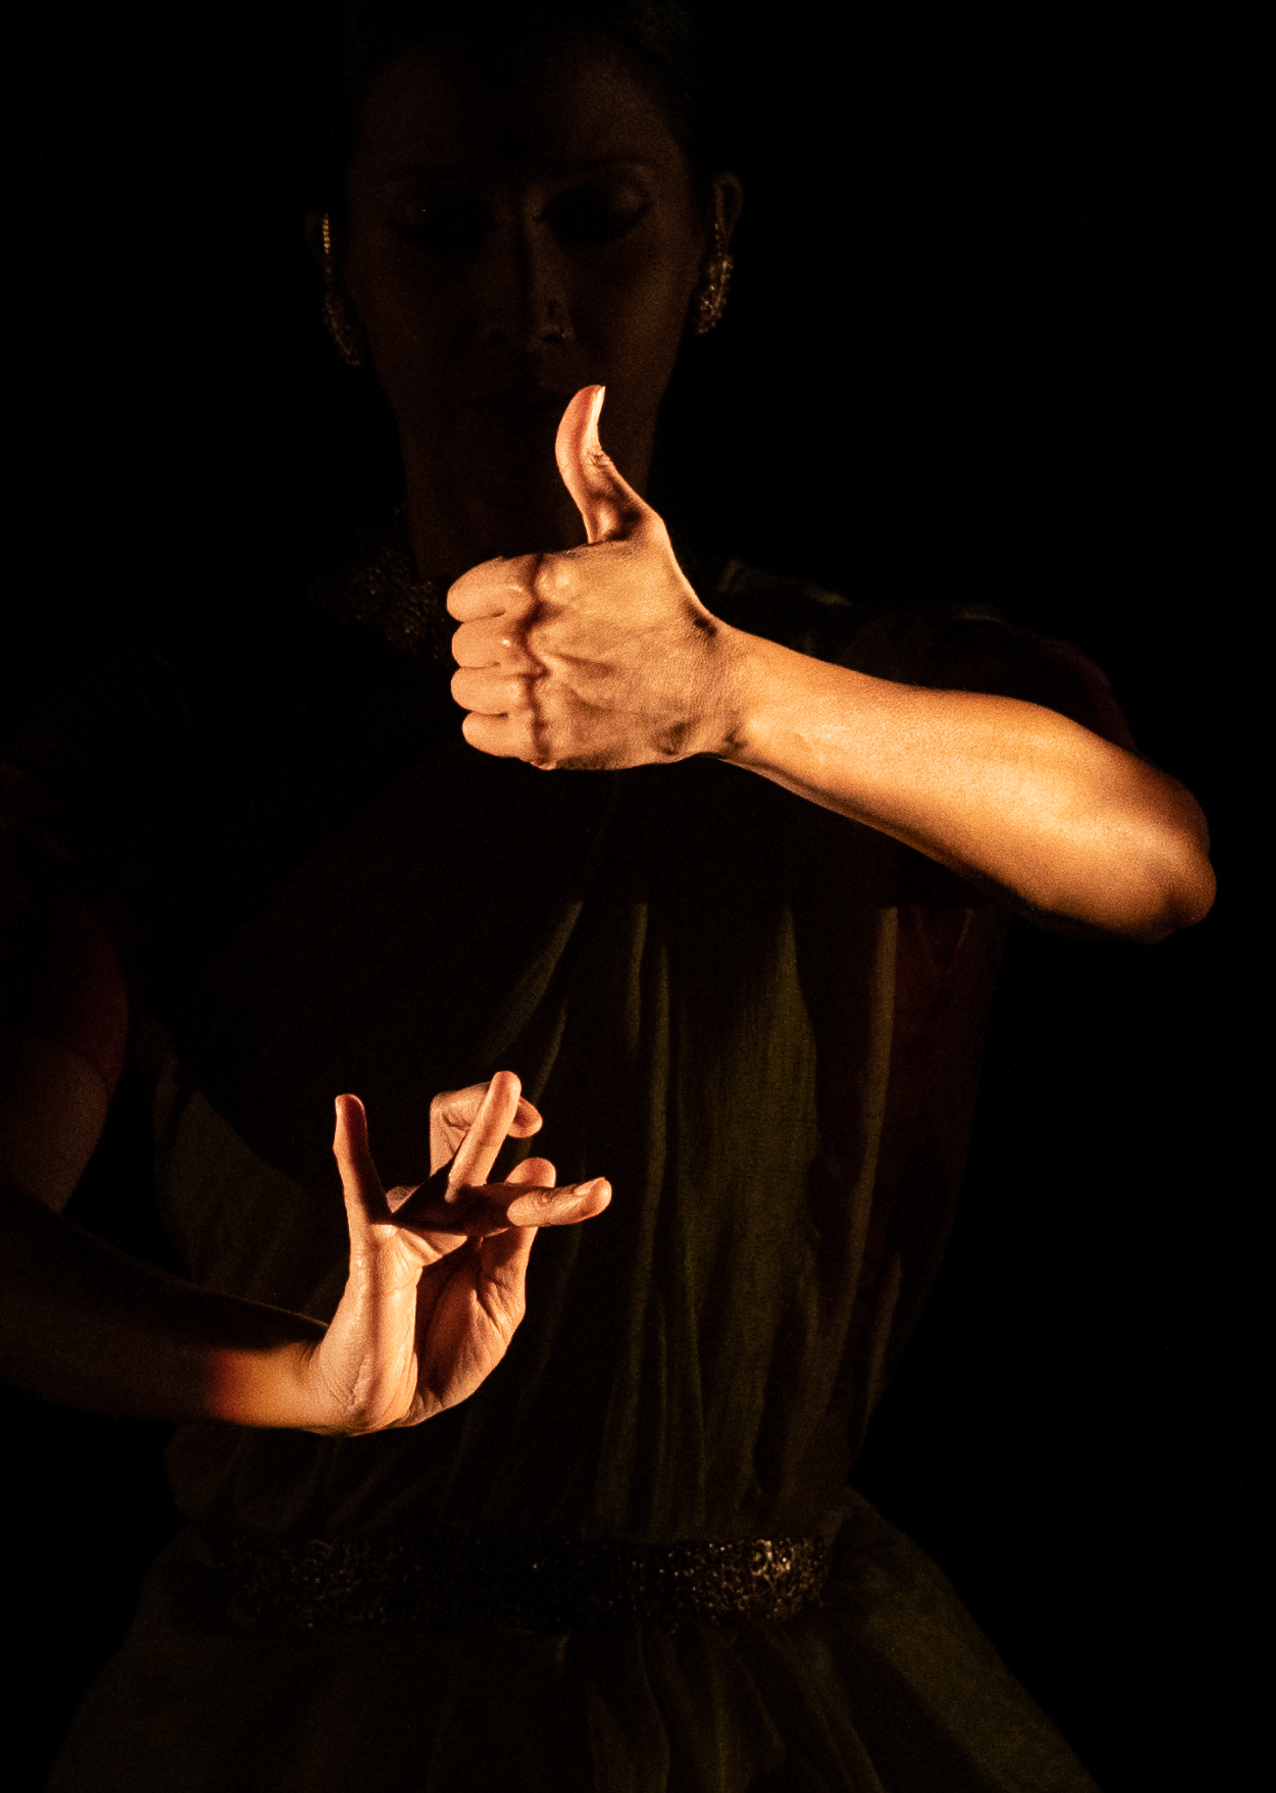 Internationally cclaimed bharatanatyam dancer Mythili Prakash's hands glow as she dances in shadow in America(na) to Me at Jacob's Pillow Dance Festival. Press photo courtesy of the Pillow